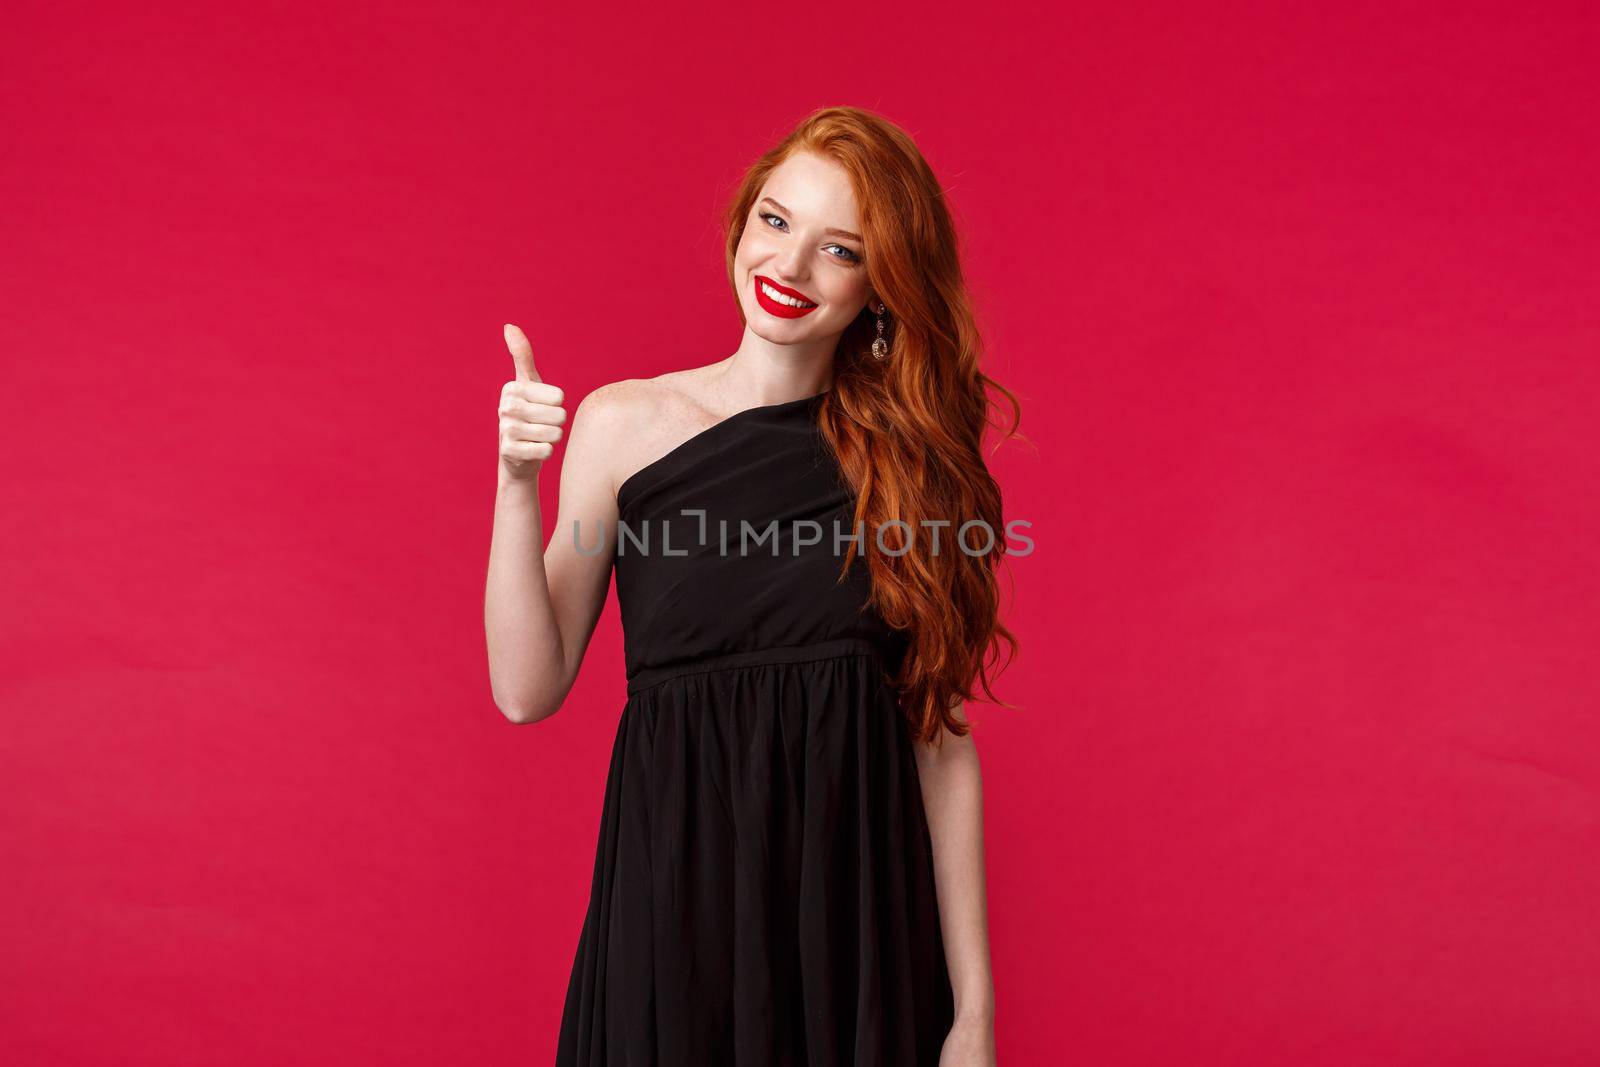 Elegance, fashion and woman concept. Portrait of satisfied charming young elegant redhead woman in black stylish dress over red background, show thumbs-up in approval or like sign.